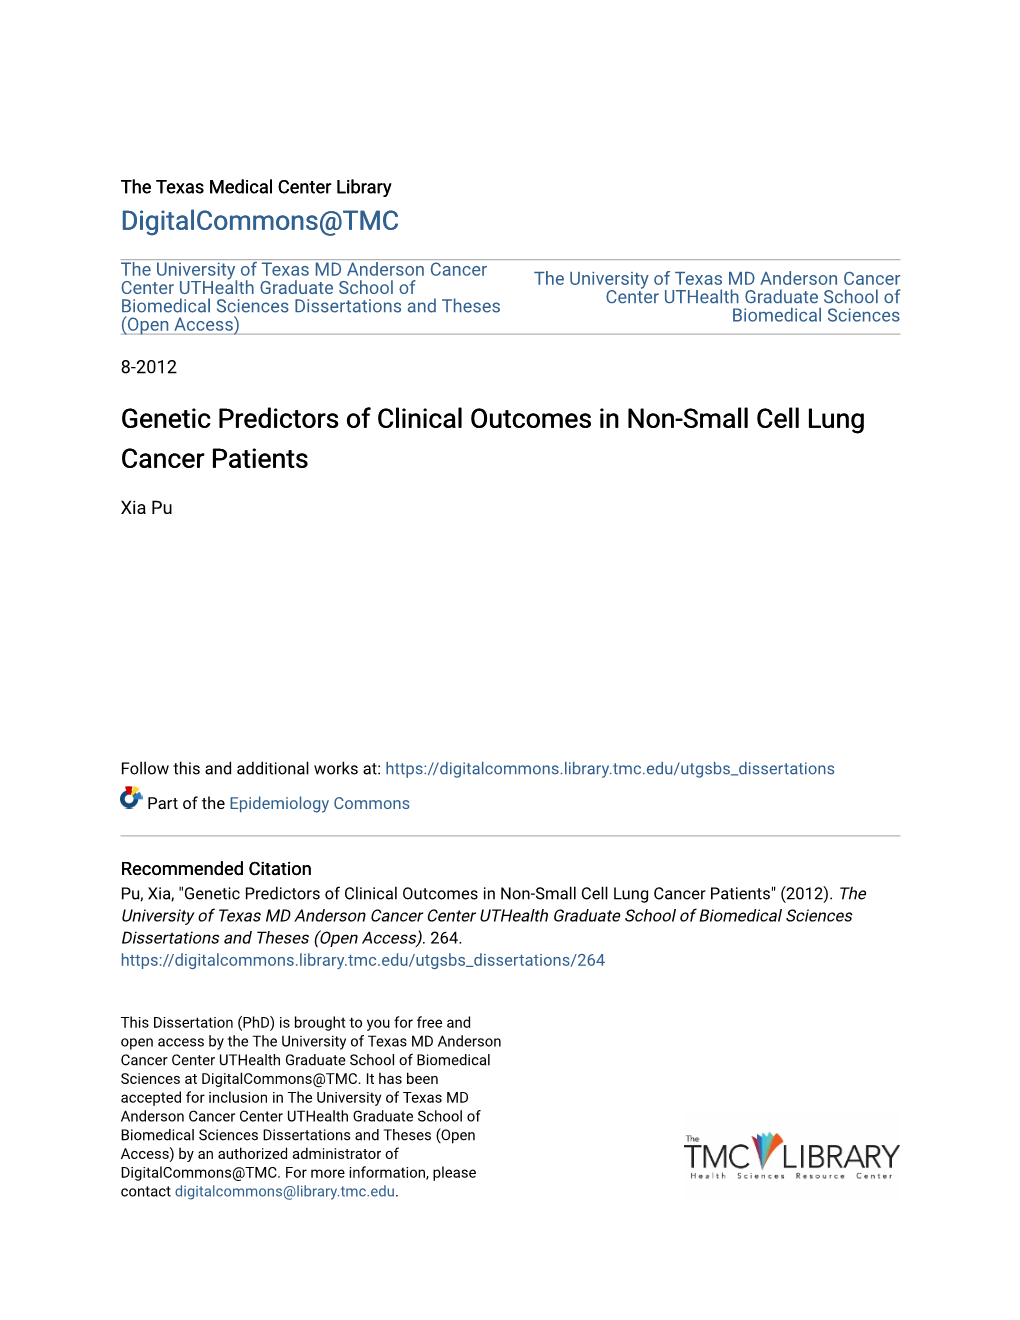 Genetic Predictors of Clinical Outcomes in Non-Small Cell Lung Cancer Patients